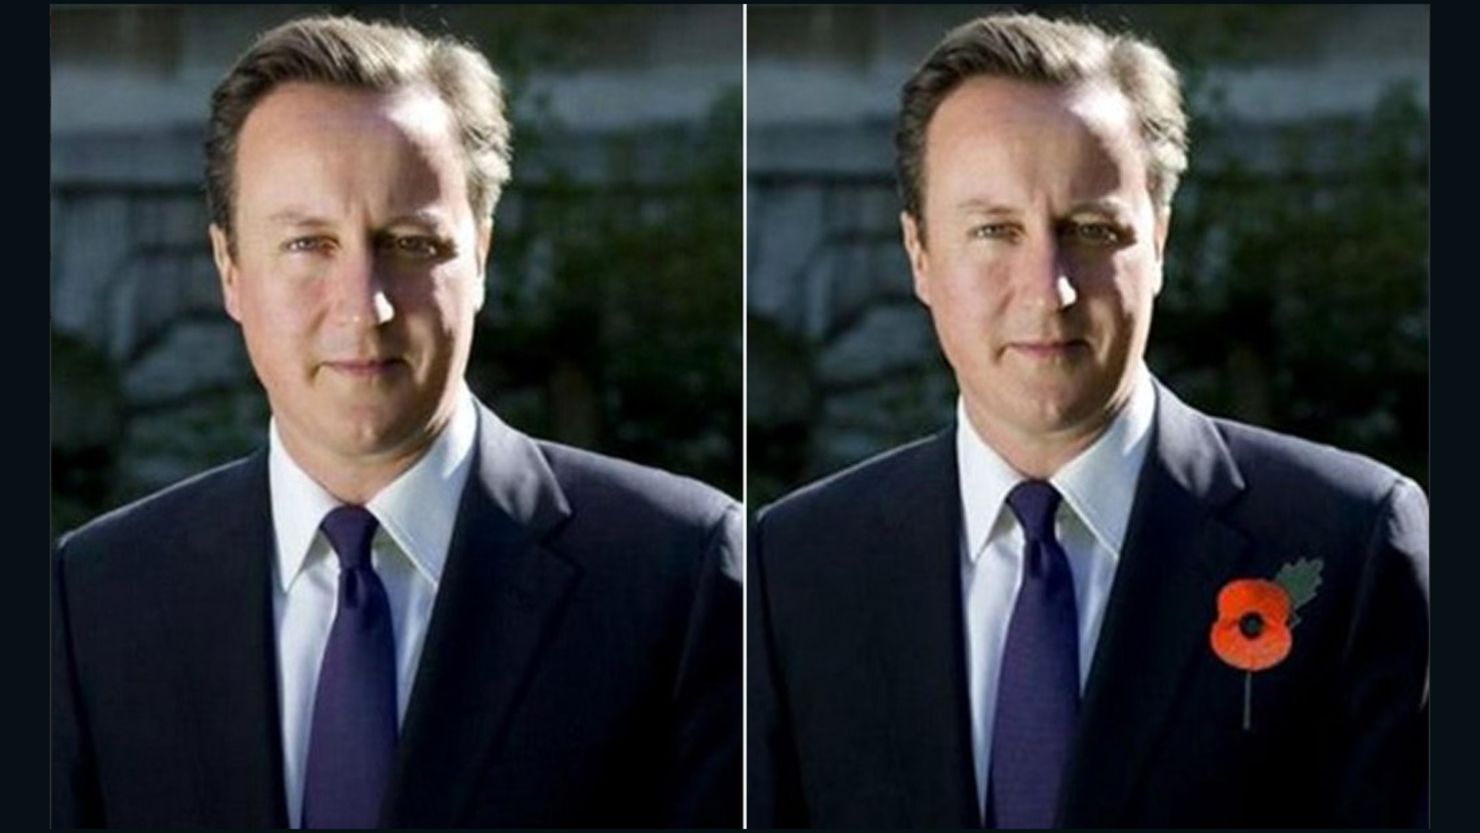 Spot the difference: David Cameron's fake poppy attempt